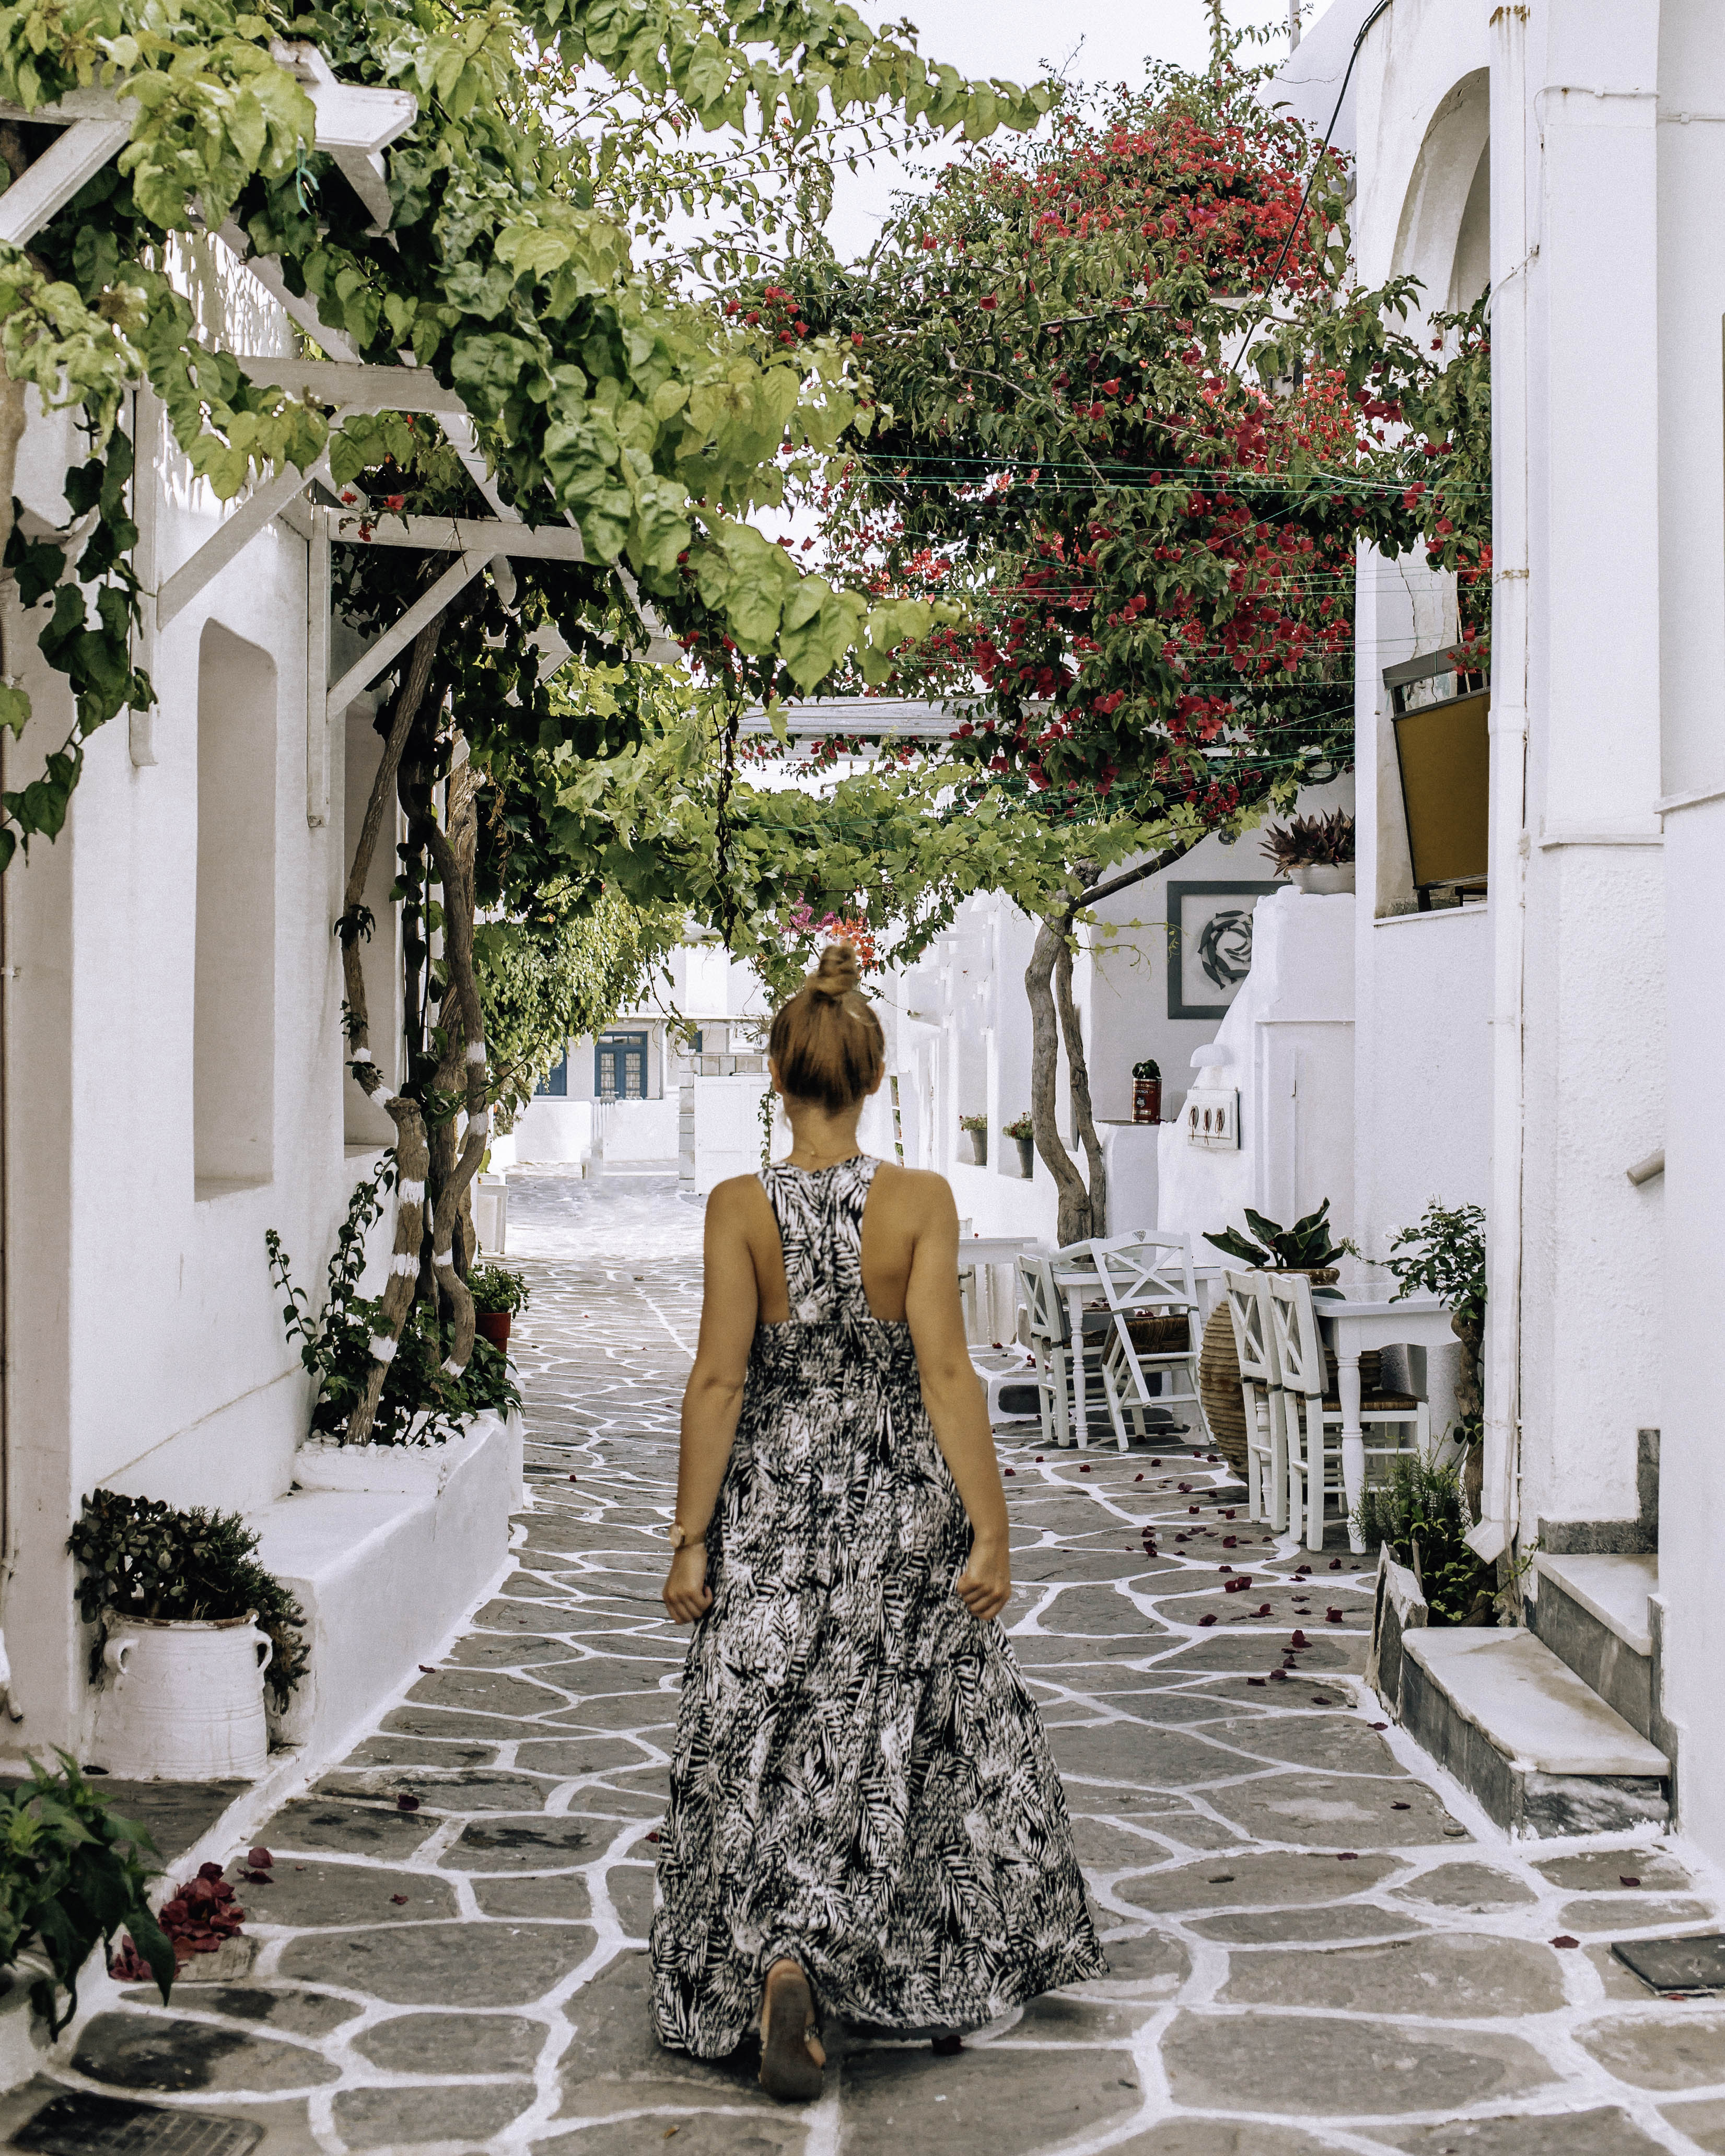 Naoussa-3 Why you need to spend few days in Paros